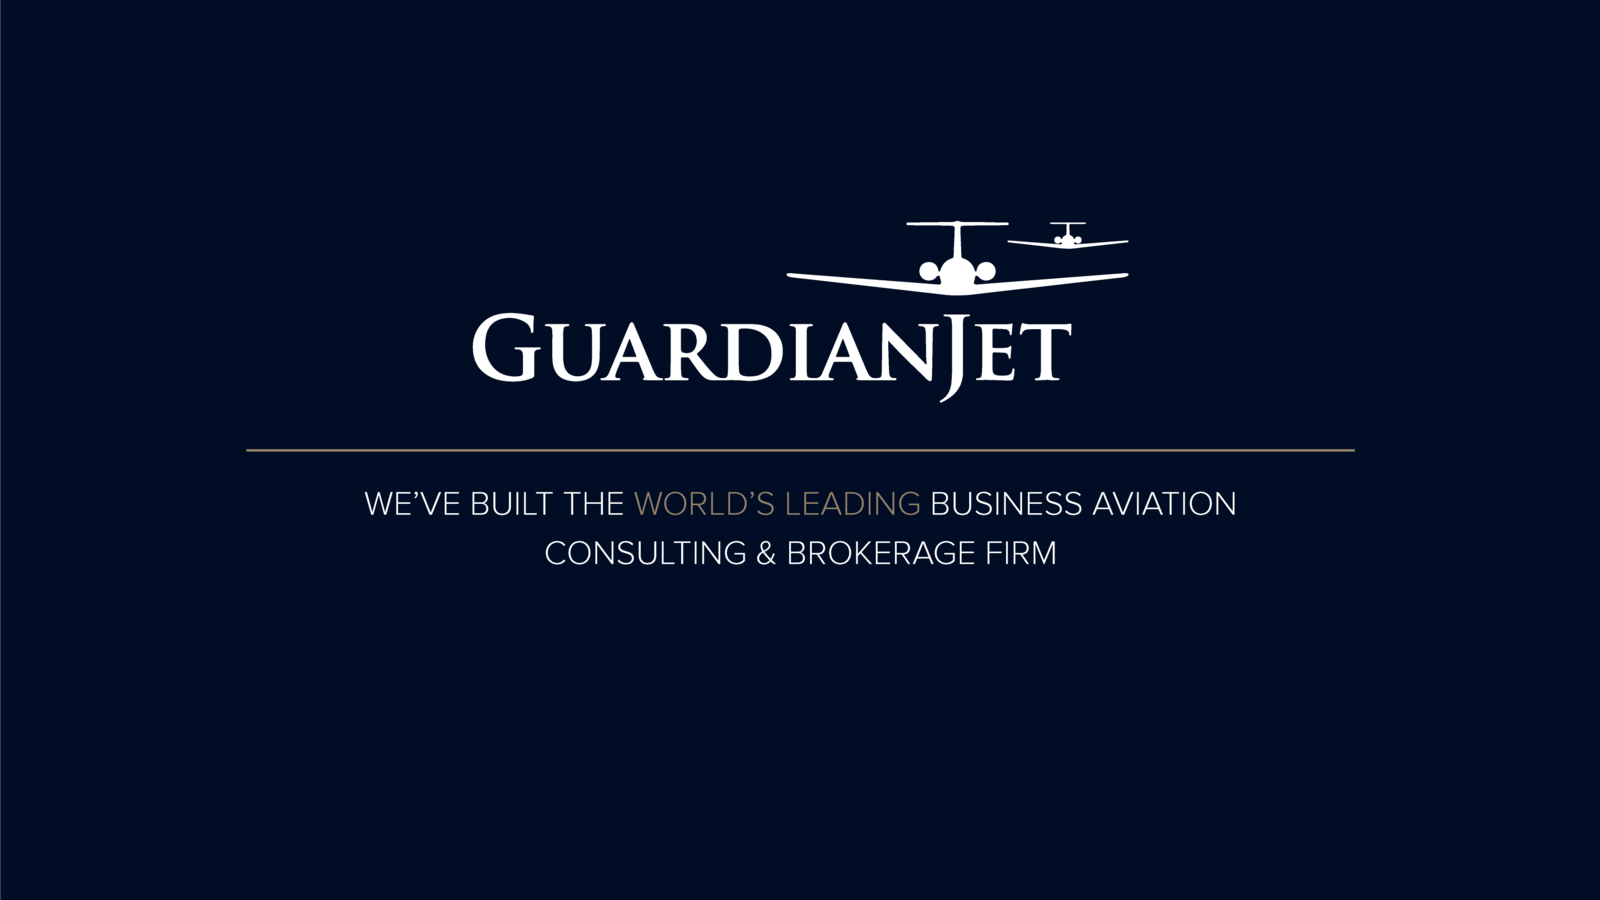 World's Leading Business Aviation Consulting & Brokerage Firm - video